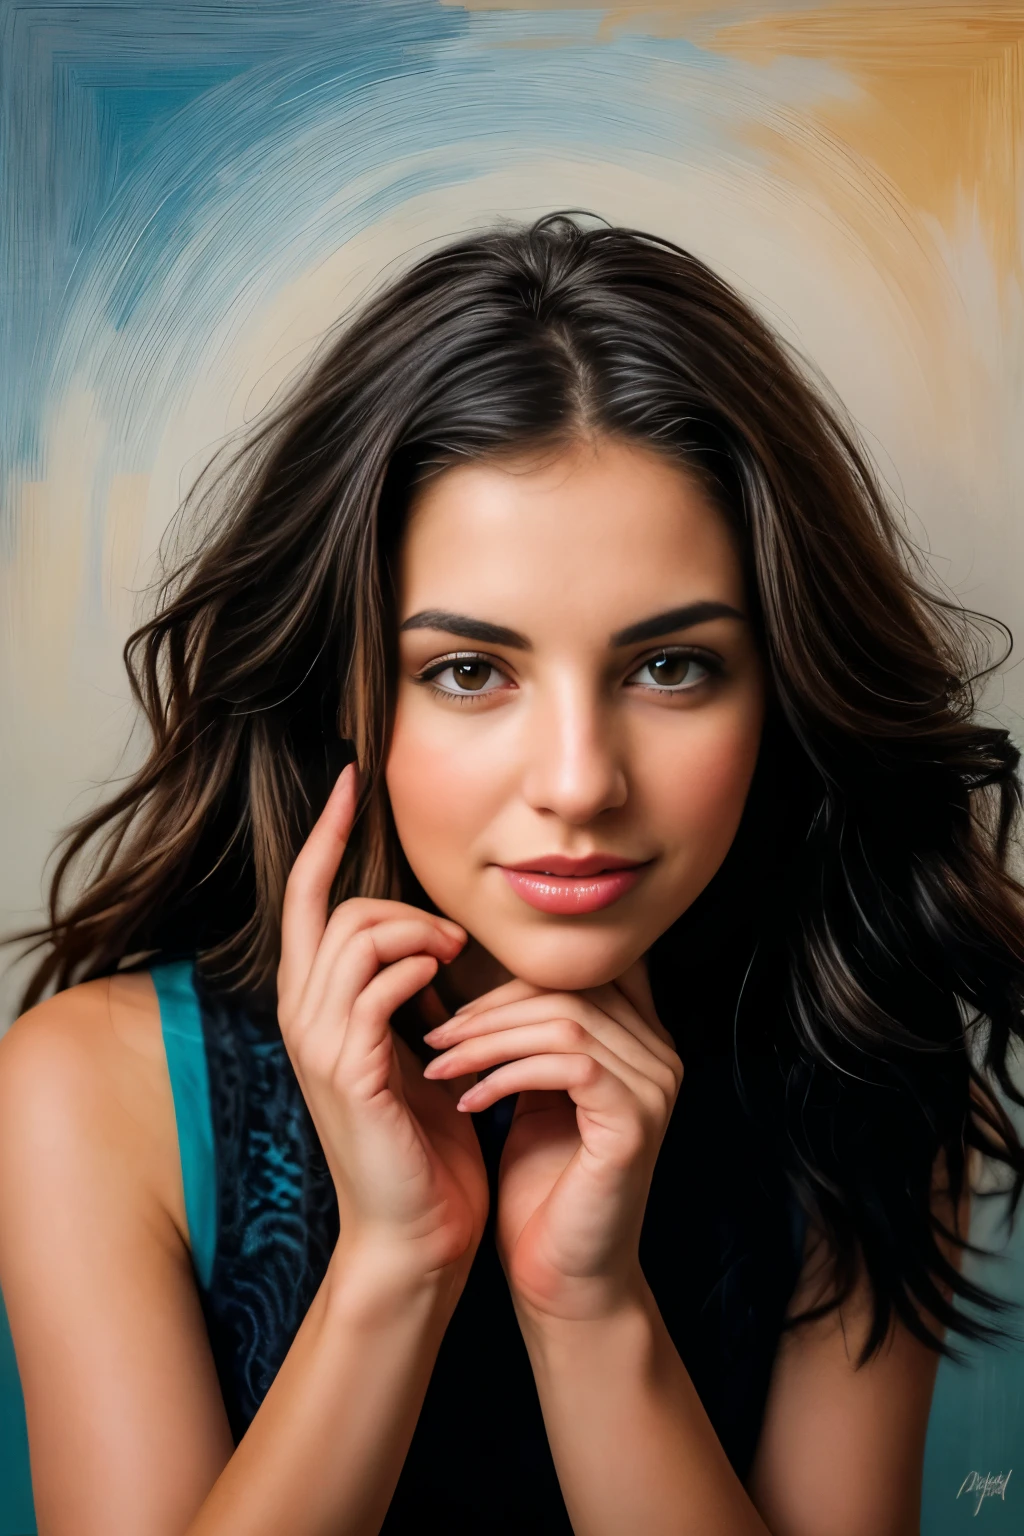 detailed figure, vibrant colors, intense lighting effects. Here is the prompt for the given theme:

"A beautiful girl with detailed facial features, including beautiful eyes, a delicate nose, and alluring lips. She is the centerpiece of the artwork, exuding an erotic vibe. The artwork showcases a high level of detail, providing an ultra-detailed depiction of the girl's figure. The colors used in the artwork are vibrant and lively, creating a visually captivating effect. The lighting effects in the artwork are intense and dramatic, adding depth and dimension to the overall composition. The medium used to create the artwork is a combination of digital illustration and sensual fine art painting. The overall image quality is of the highest caliber, with a resolution of 4k or 8k, and it possesses a realistic and photorealistic aesthetic, capturing every intricate detail of the girl's form and creating a masterpiece that is visually stunning. The color palette used in the artwork is rich and diverse, incorporating a wide range of seductive hues. The lighting in the artwork is carefully designed to accentuate the girl's features and create a mesmerizing atmosphere. The artwork portrays an erotic scene that can be both sensual and captivating, invoking strong emotions in the viewer. The overall composition is balanced and harmonious, with a focus on the girl's allure and captivating presence. This artwork showcases the beauty and allure of the female form in a distinctive and eye-catching manner." 